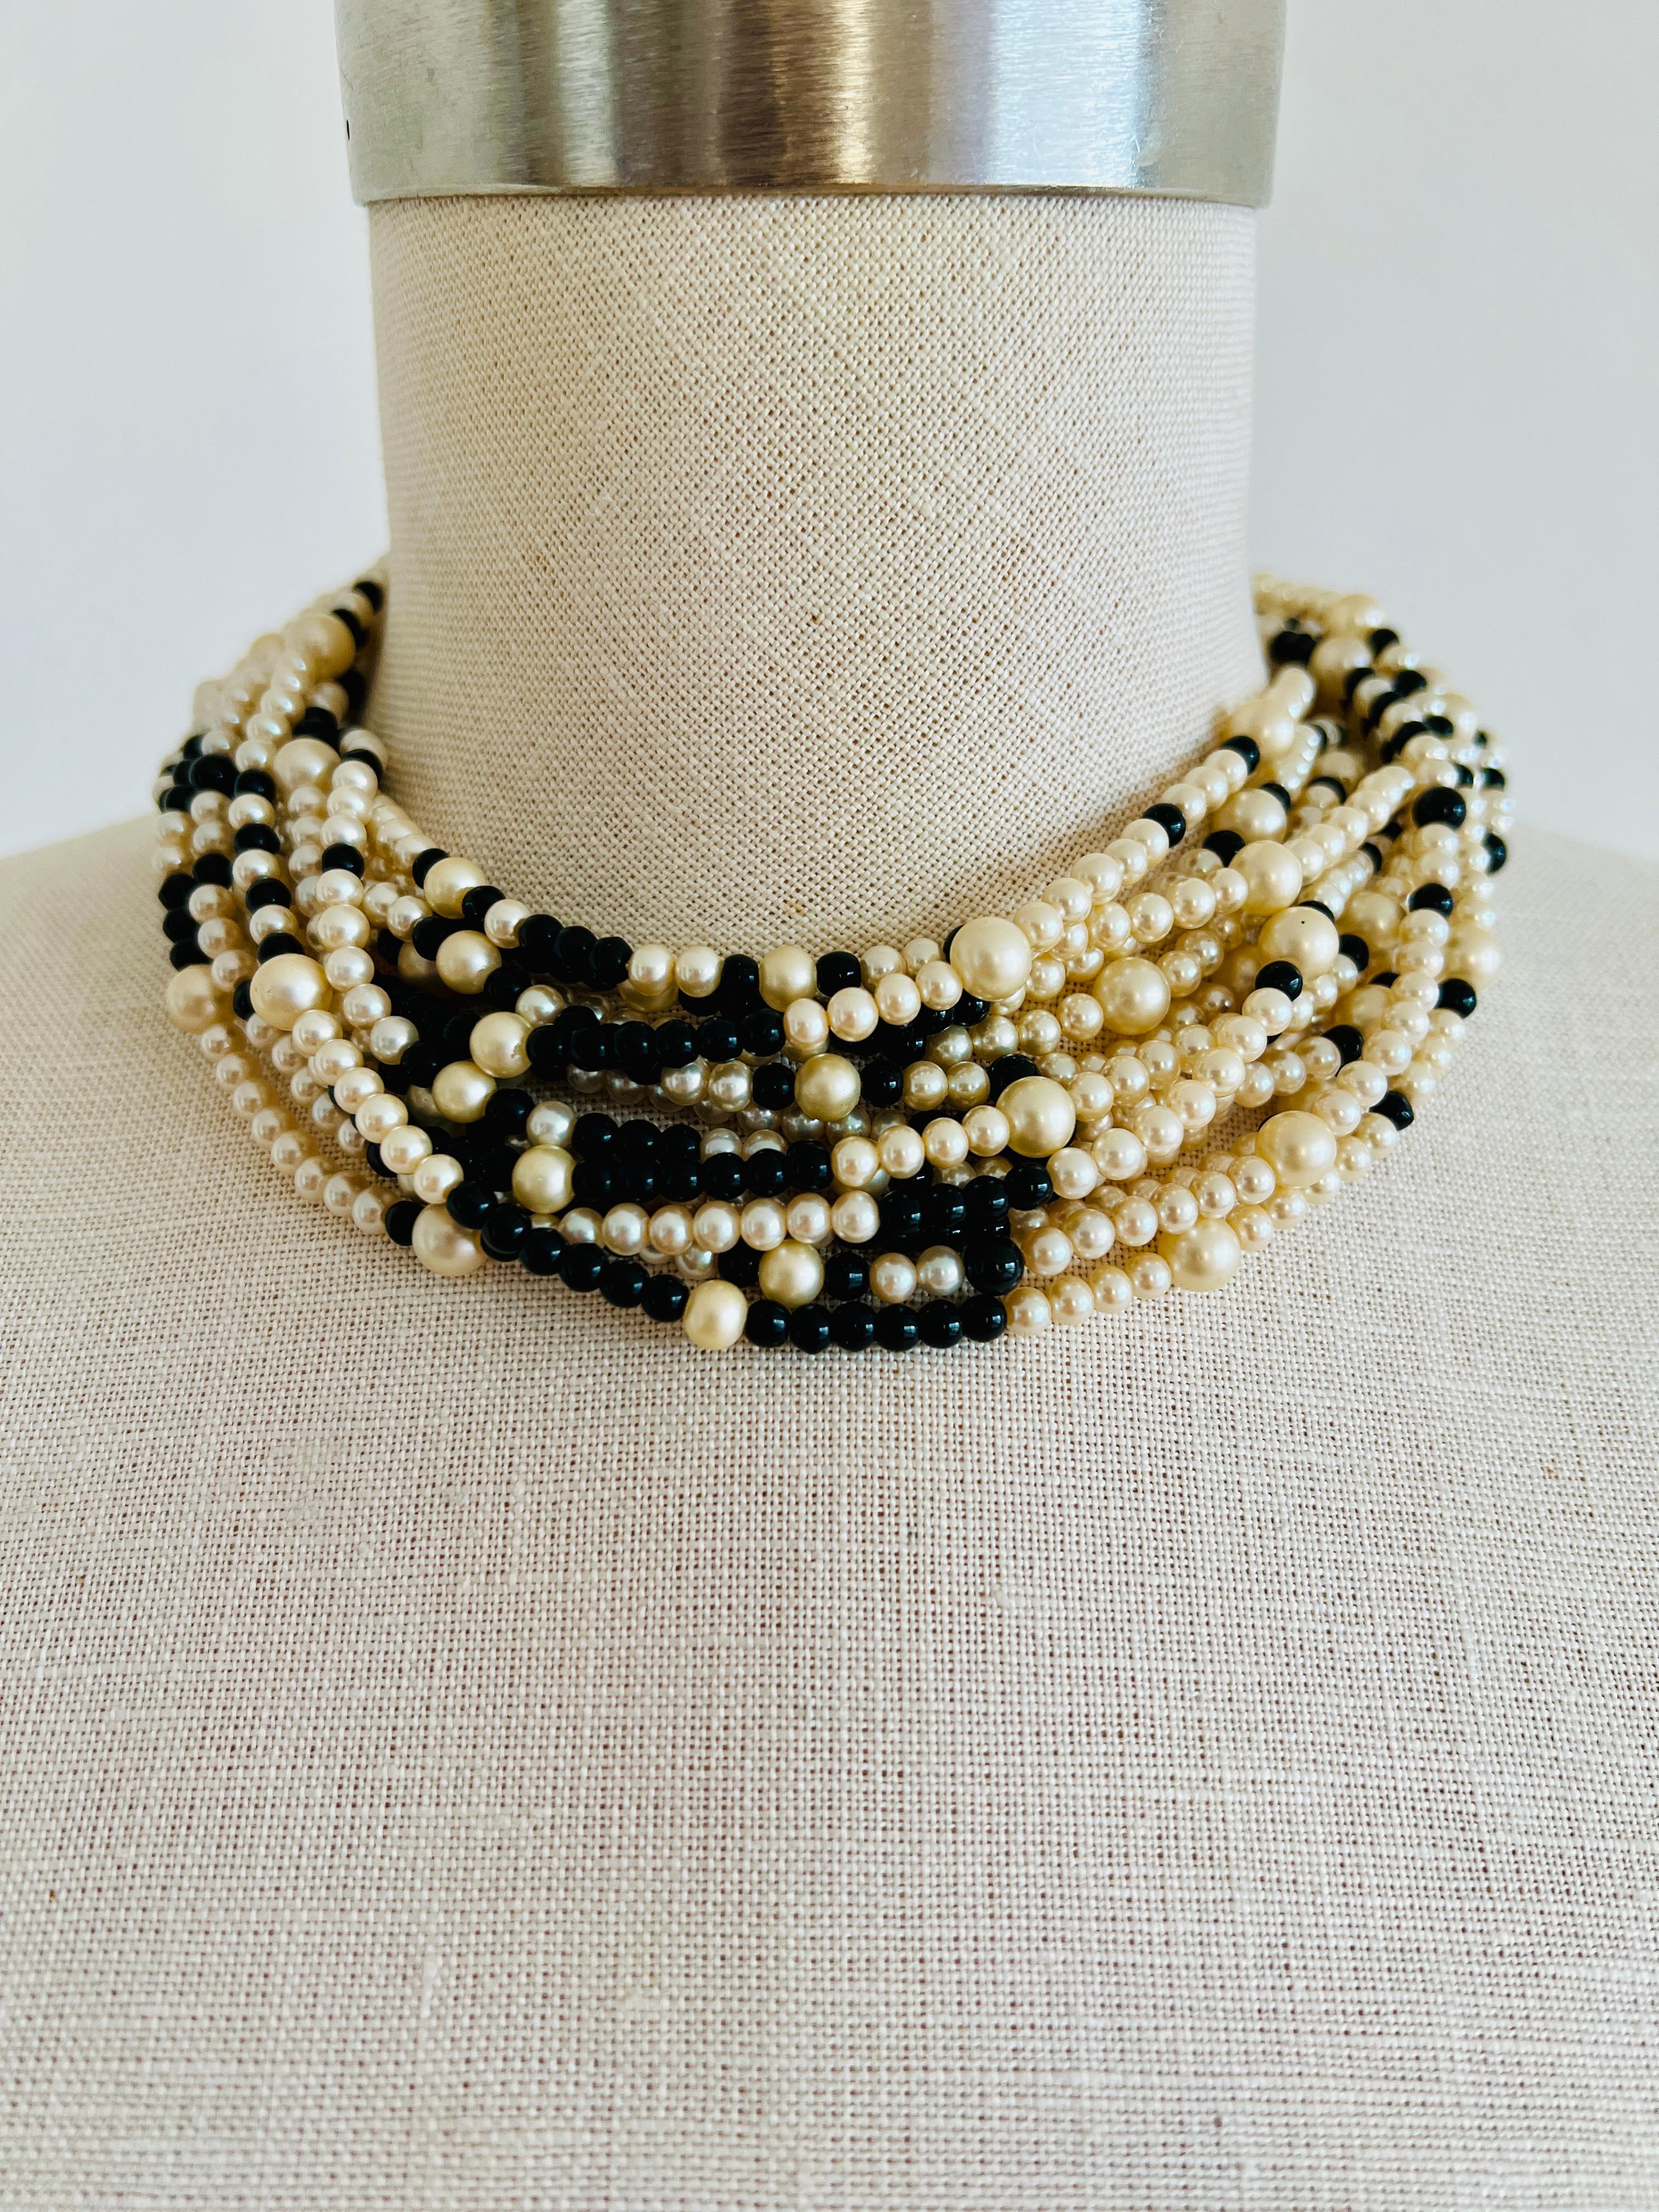 Ciner Beaded Black Gold Faux Pearl Choker Twisted Torsade Necklace Earring Set In Good Condition For Sale In Sausalito, CA